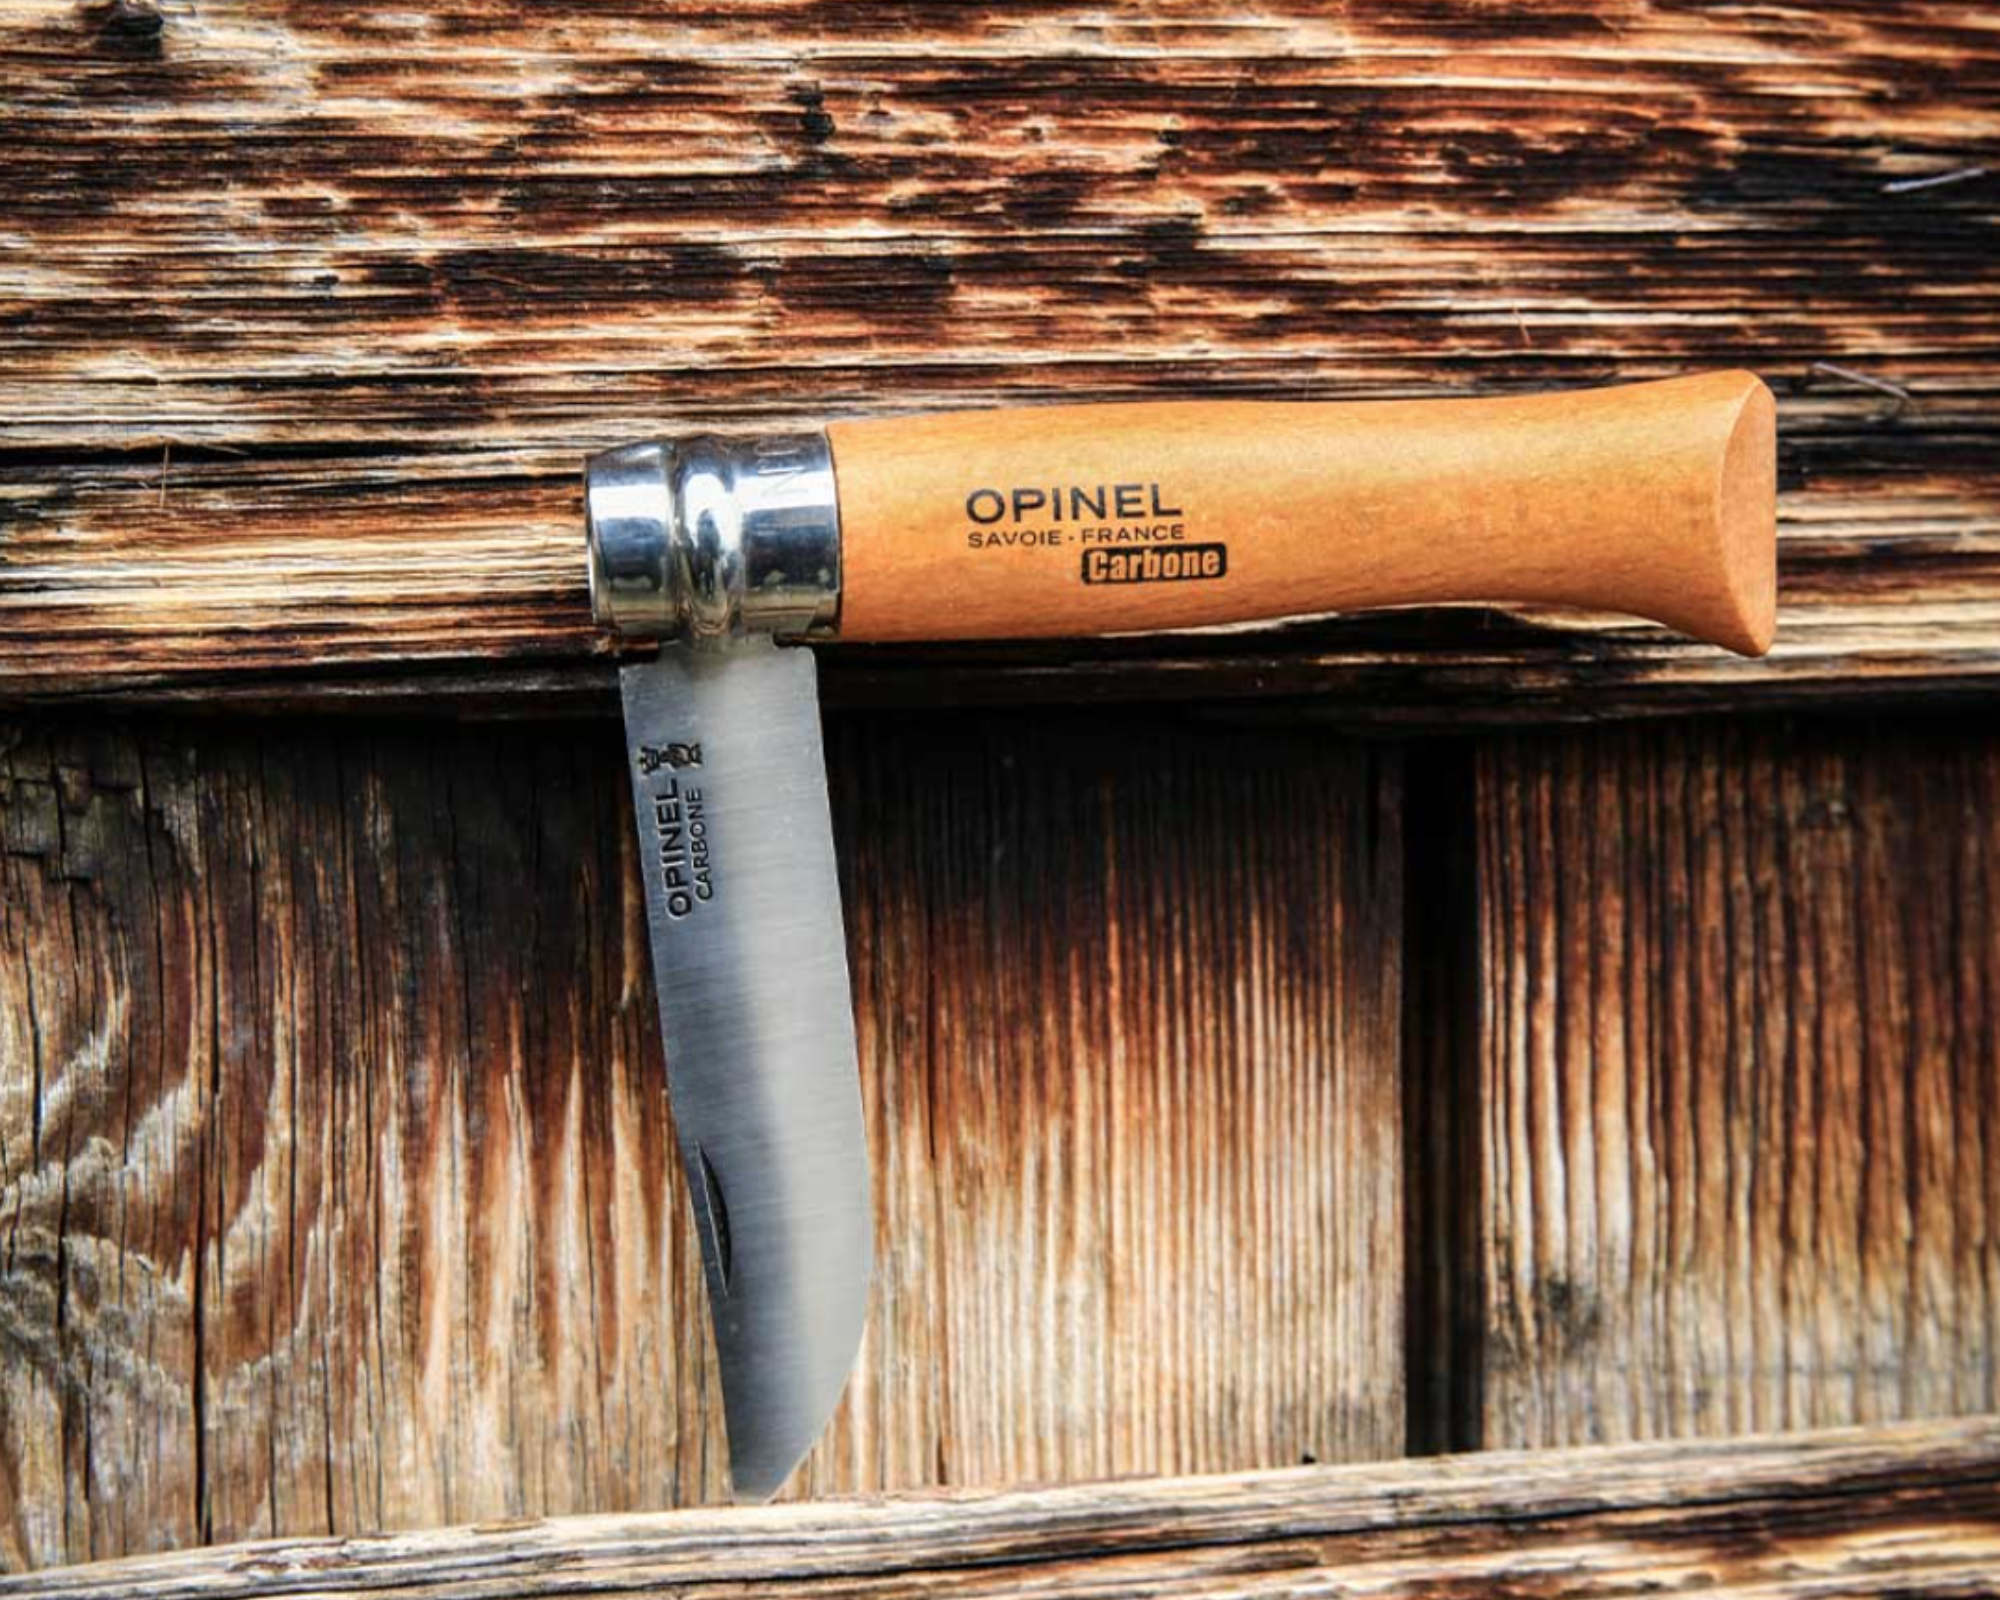 Couteau nr8 opinel carbone semi ouvert